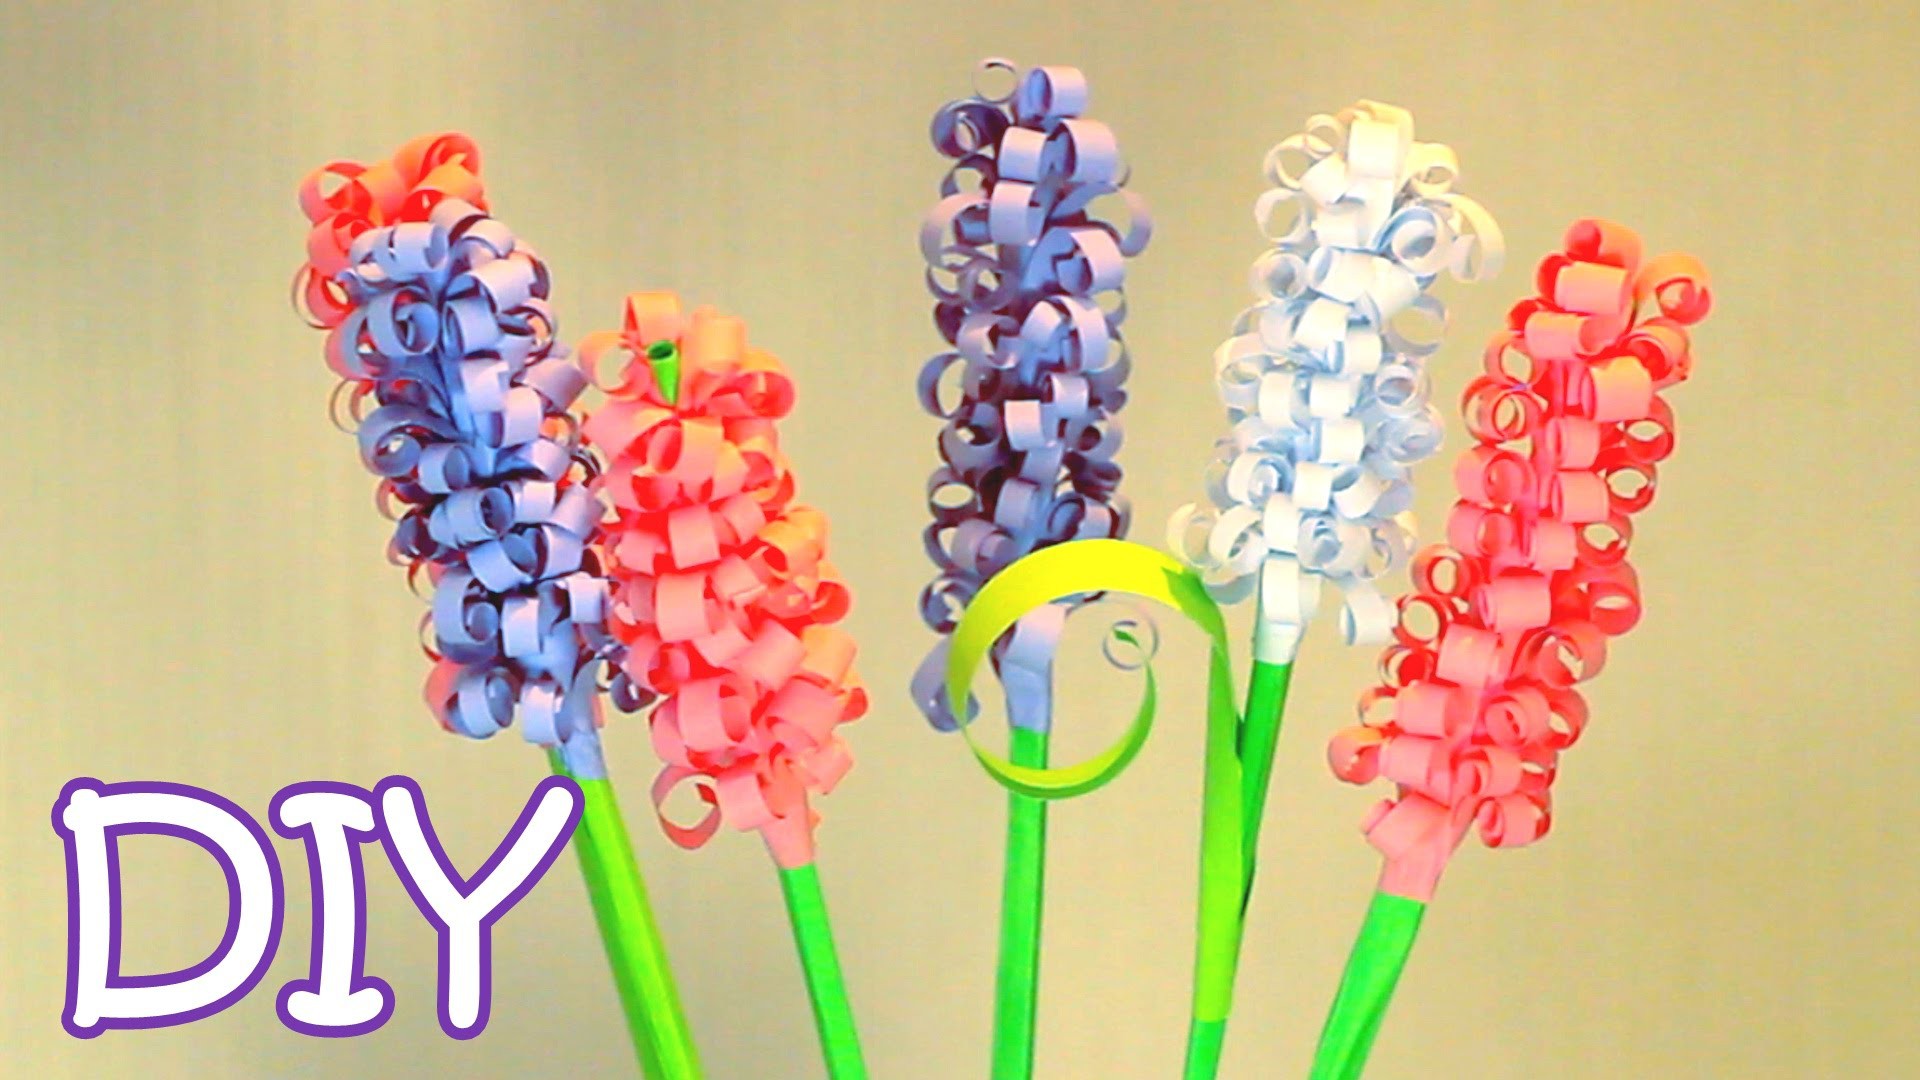 DIY Curly Paper Flowers - How to make Swirly Paper Hyacinths